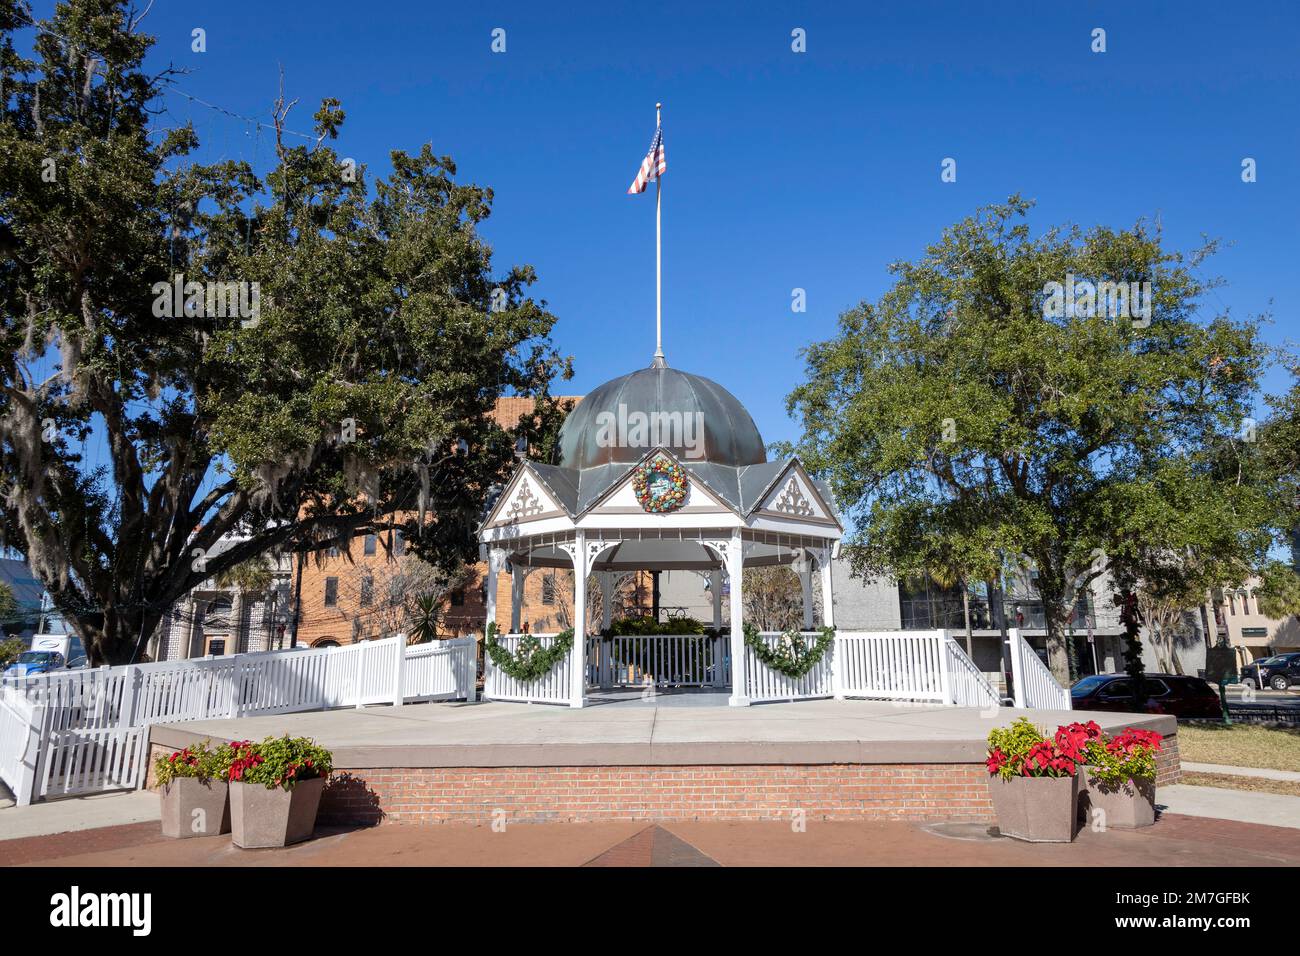 Photo of the gazebo on the square in Ocala, Florida on a beautiful sunny day Stock Photo